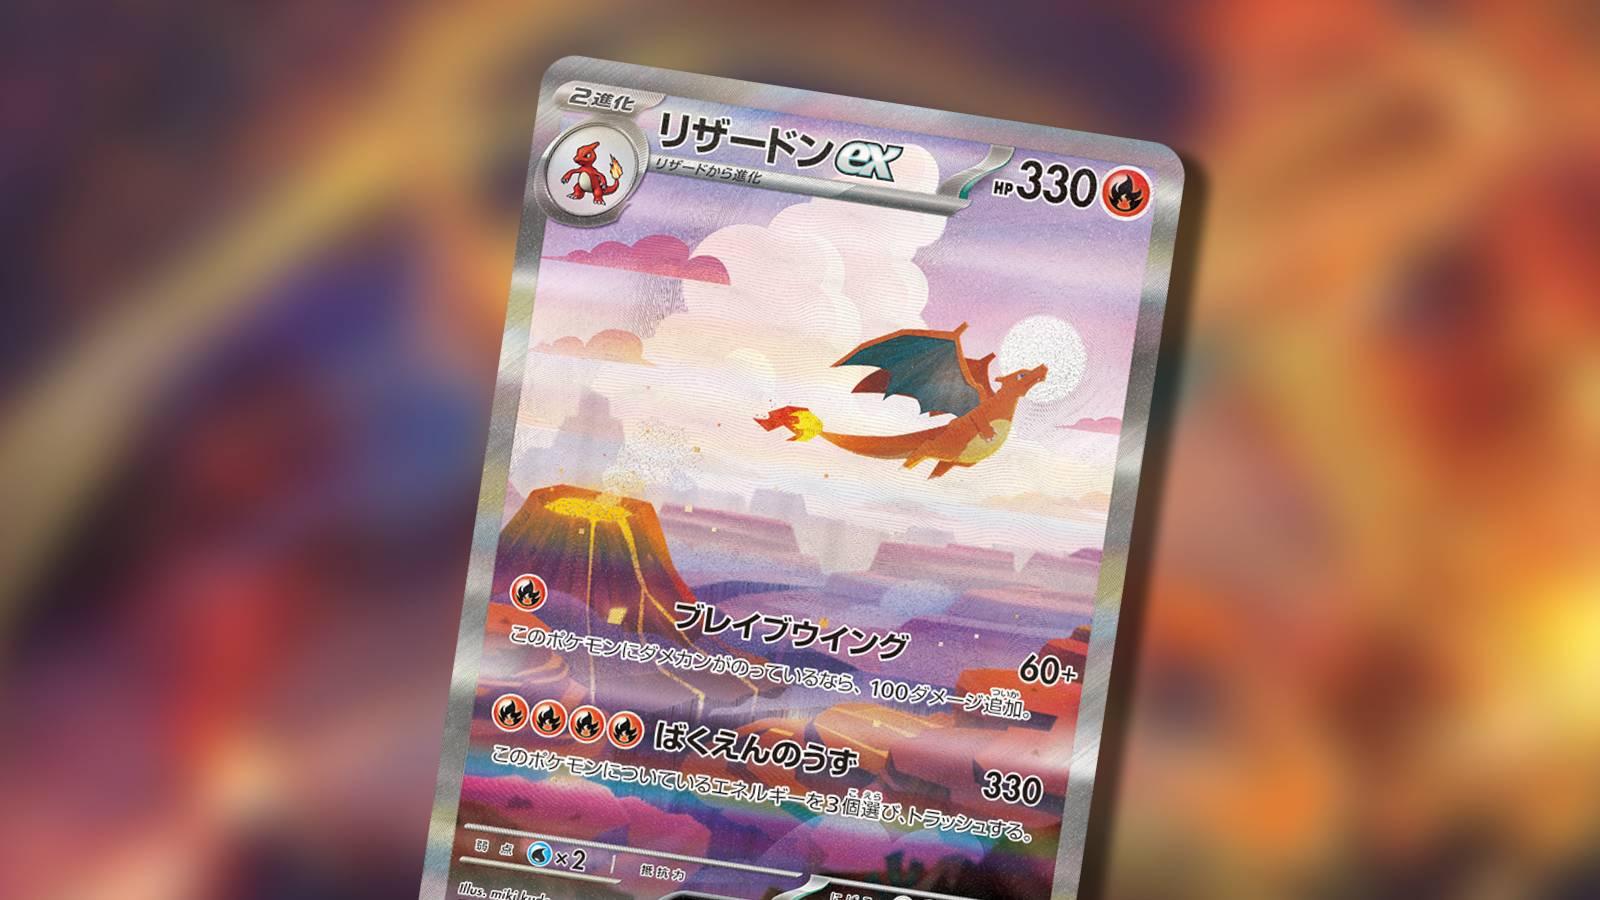 A CHarizard Pokemon TCG card appears against a blurred background